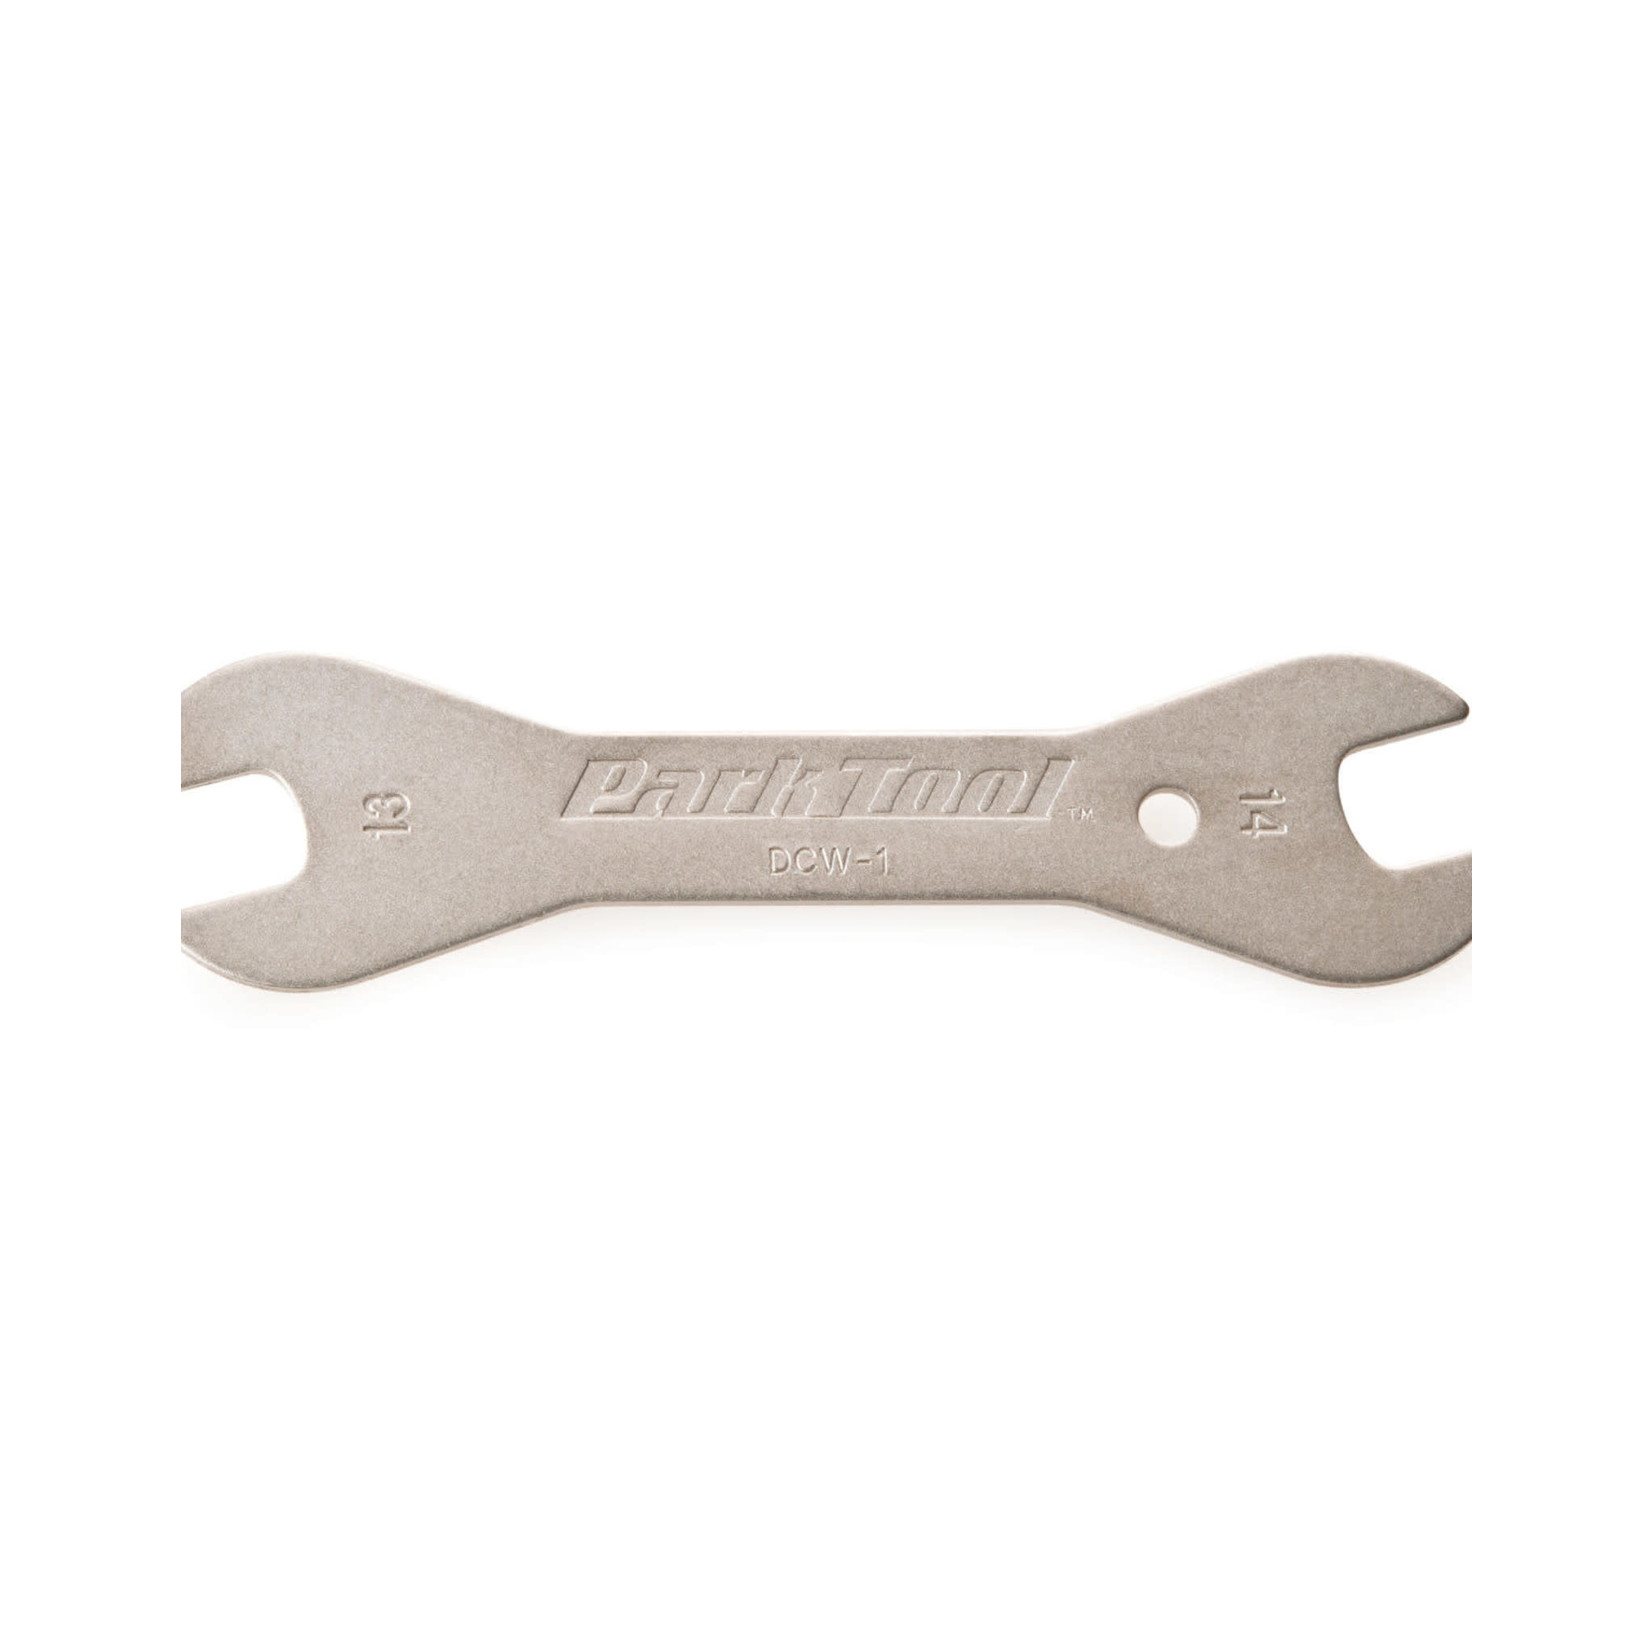 Park Tool Park Tl, DCW-1, Duble-ended cne wrench, 13mm/14mm